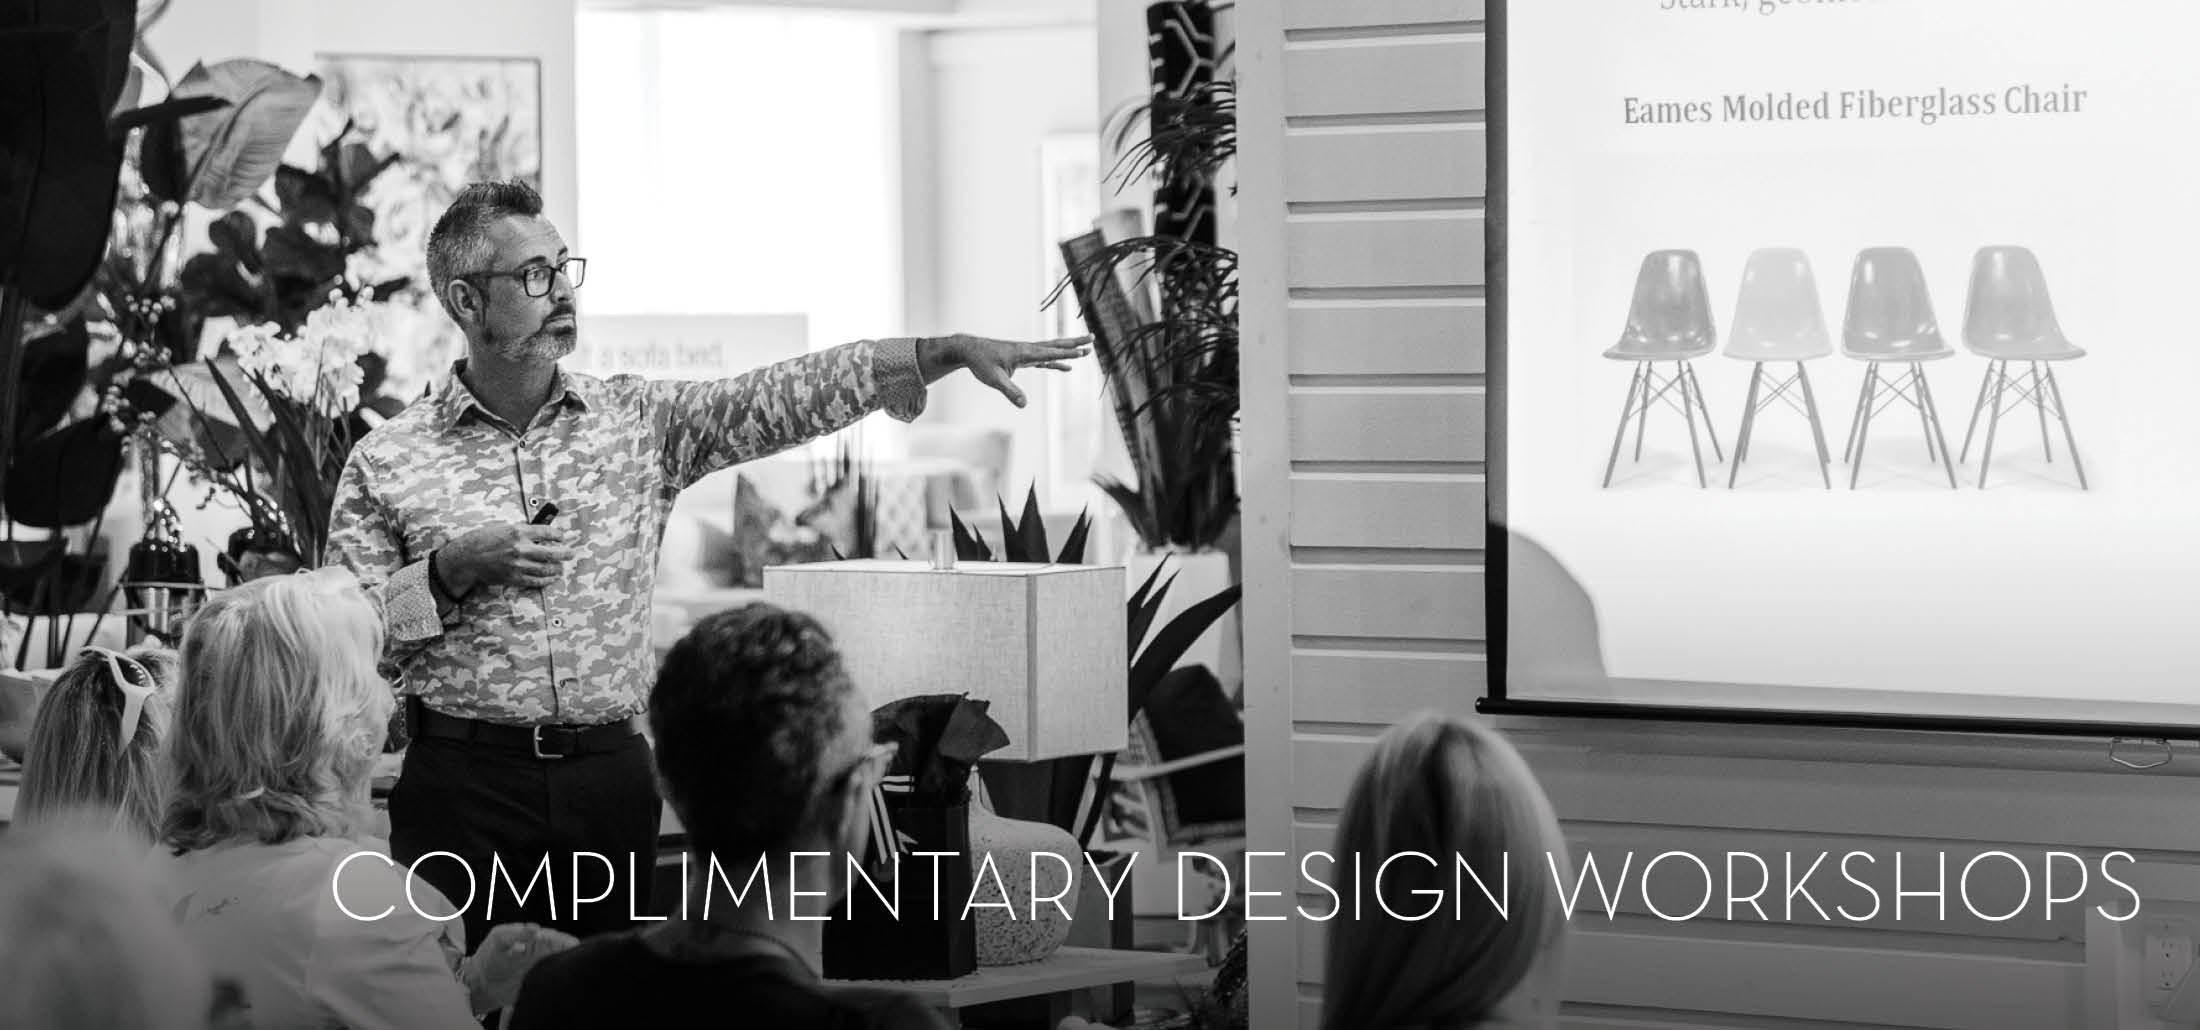 Image of a designer presenting to a crowd at a design workshop. Text: Complimentary design workshops. Links to upcoming events page.